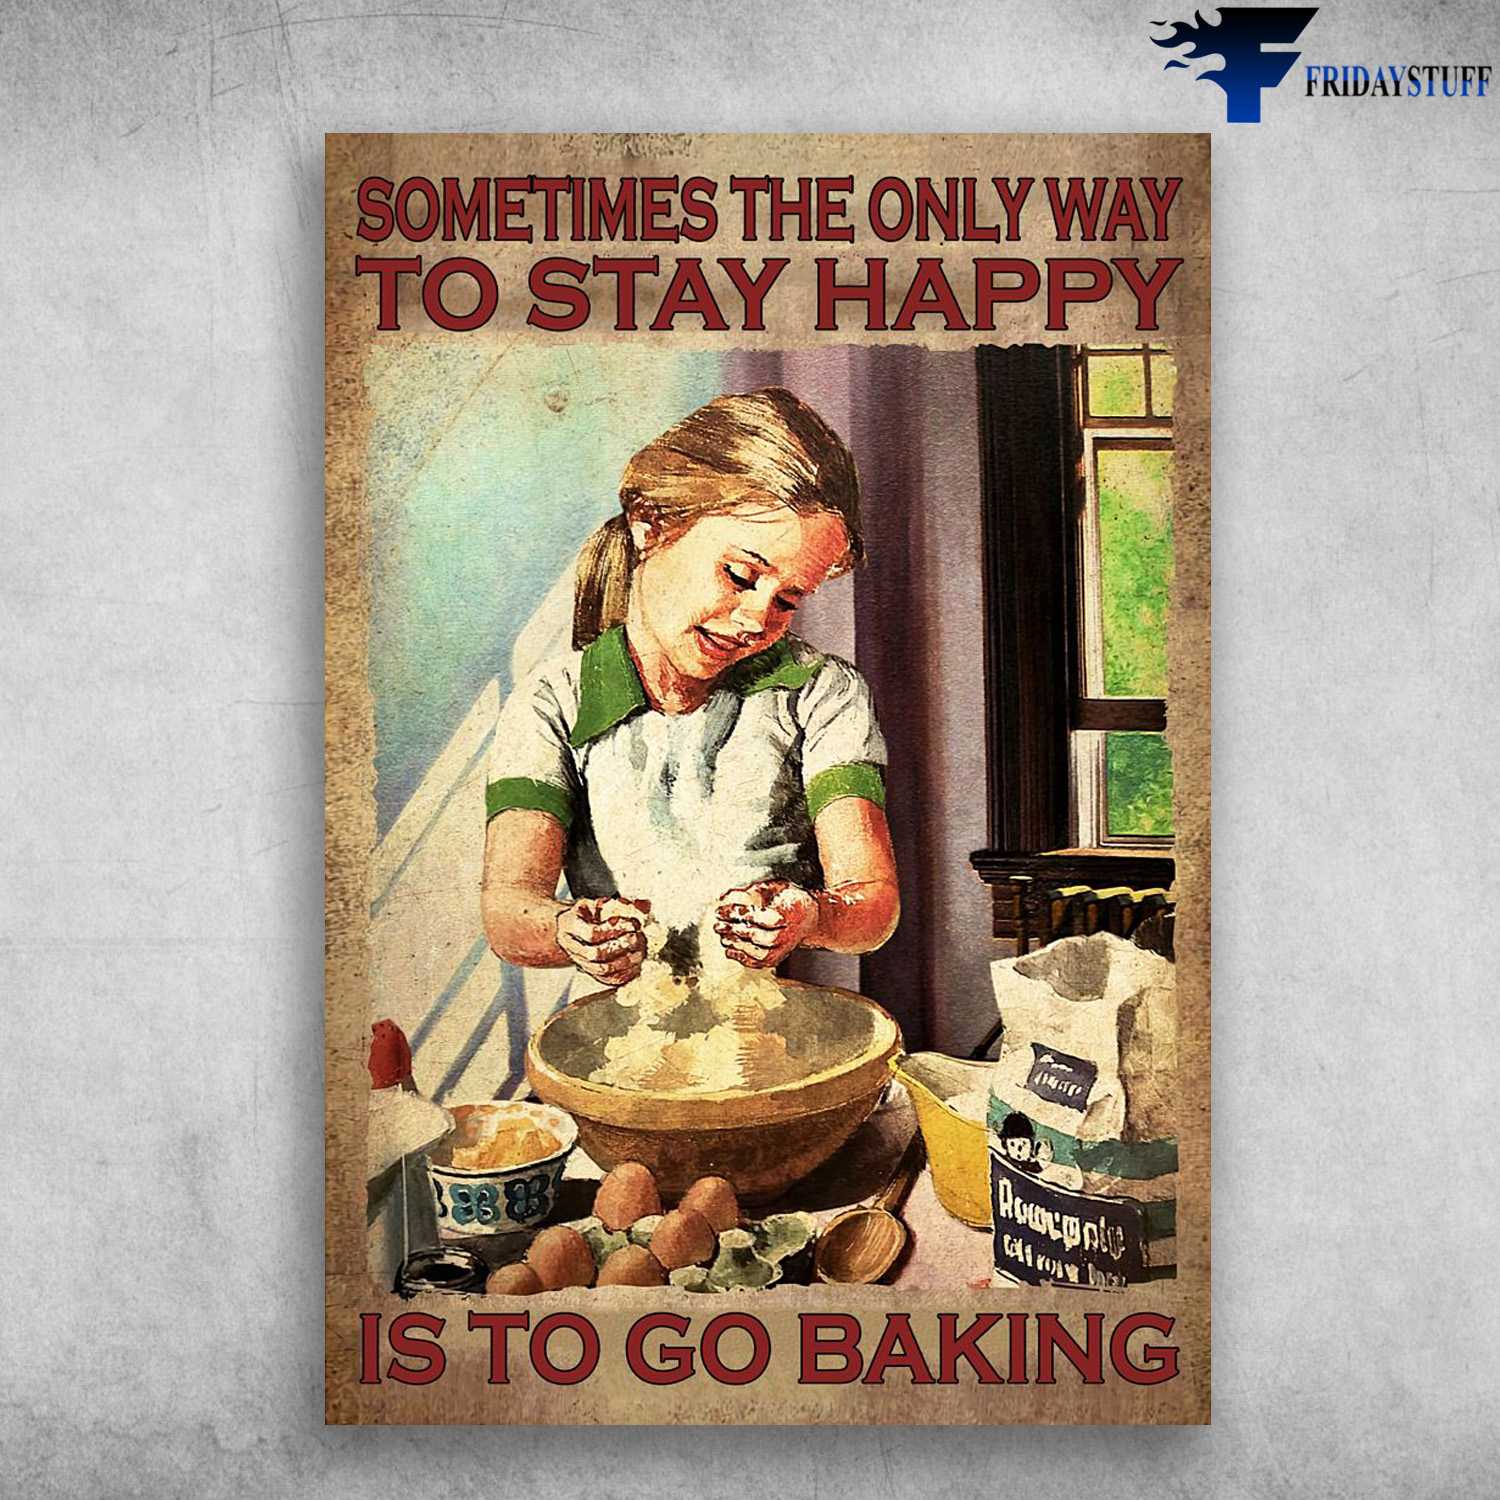 Baking Cake, Baking Lover, Sometimes The Only Way To Stay Happy, Is To Go Baking